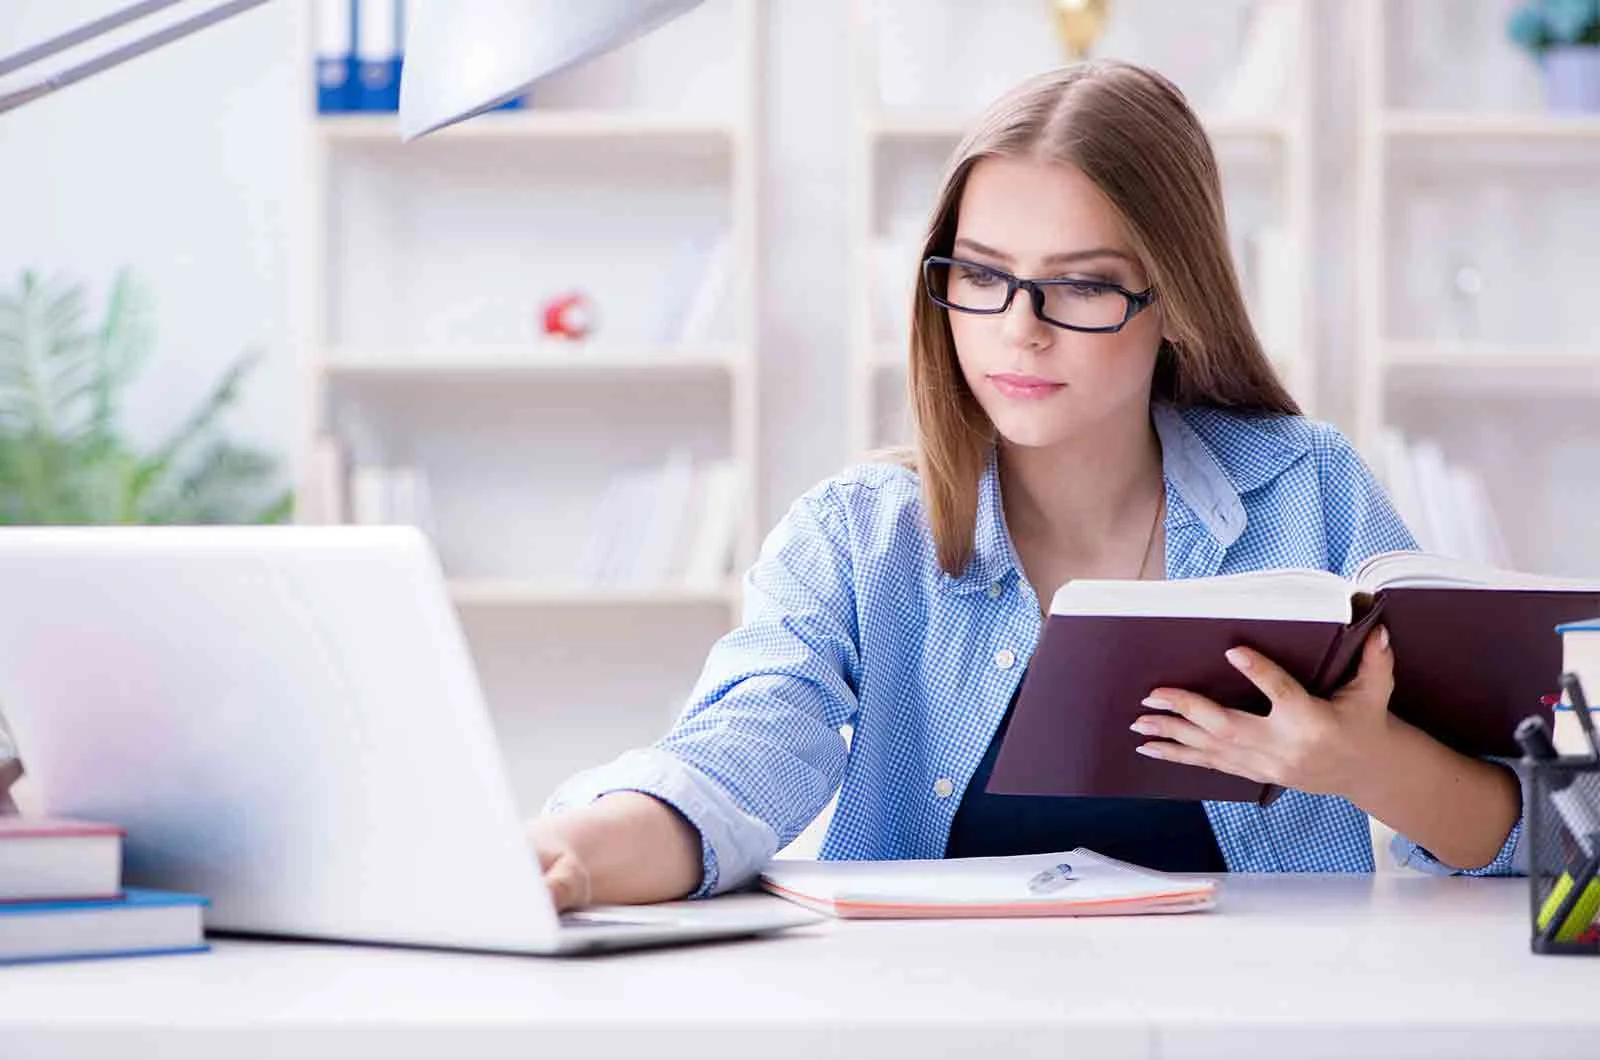 A girl wearing glasses and holding a book while using a laptop. Concept of online editing and proofreading services.